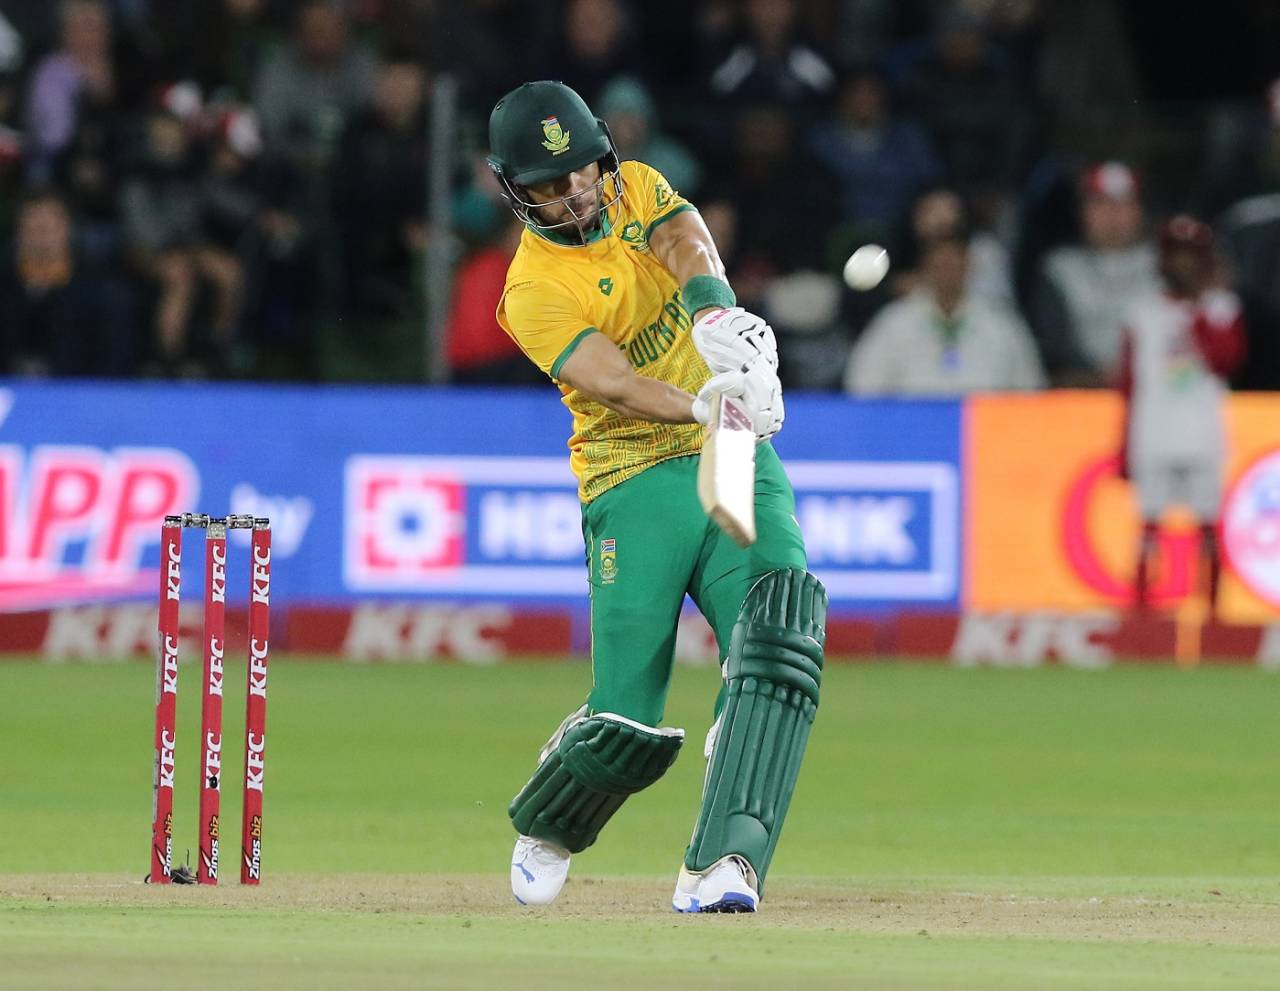 Reeza Hendricks has been excellent for South Africa in T20Is this year